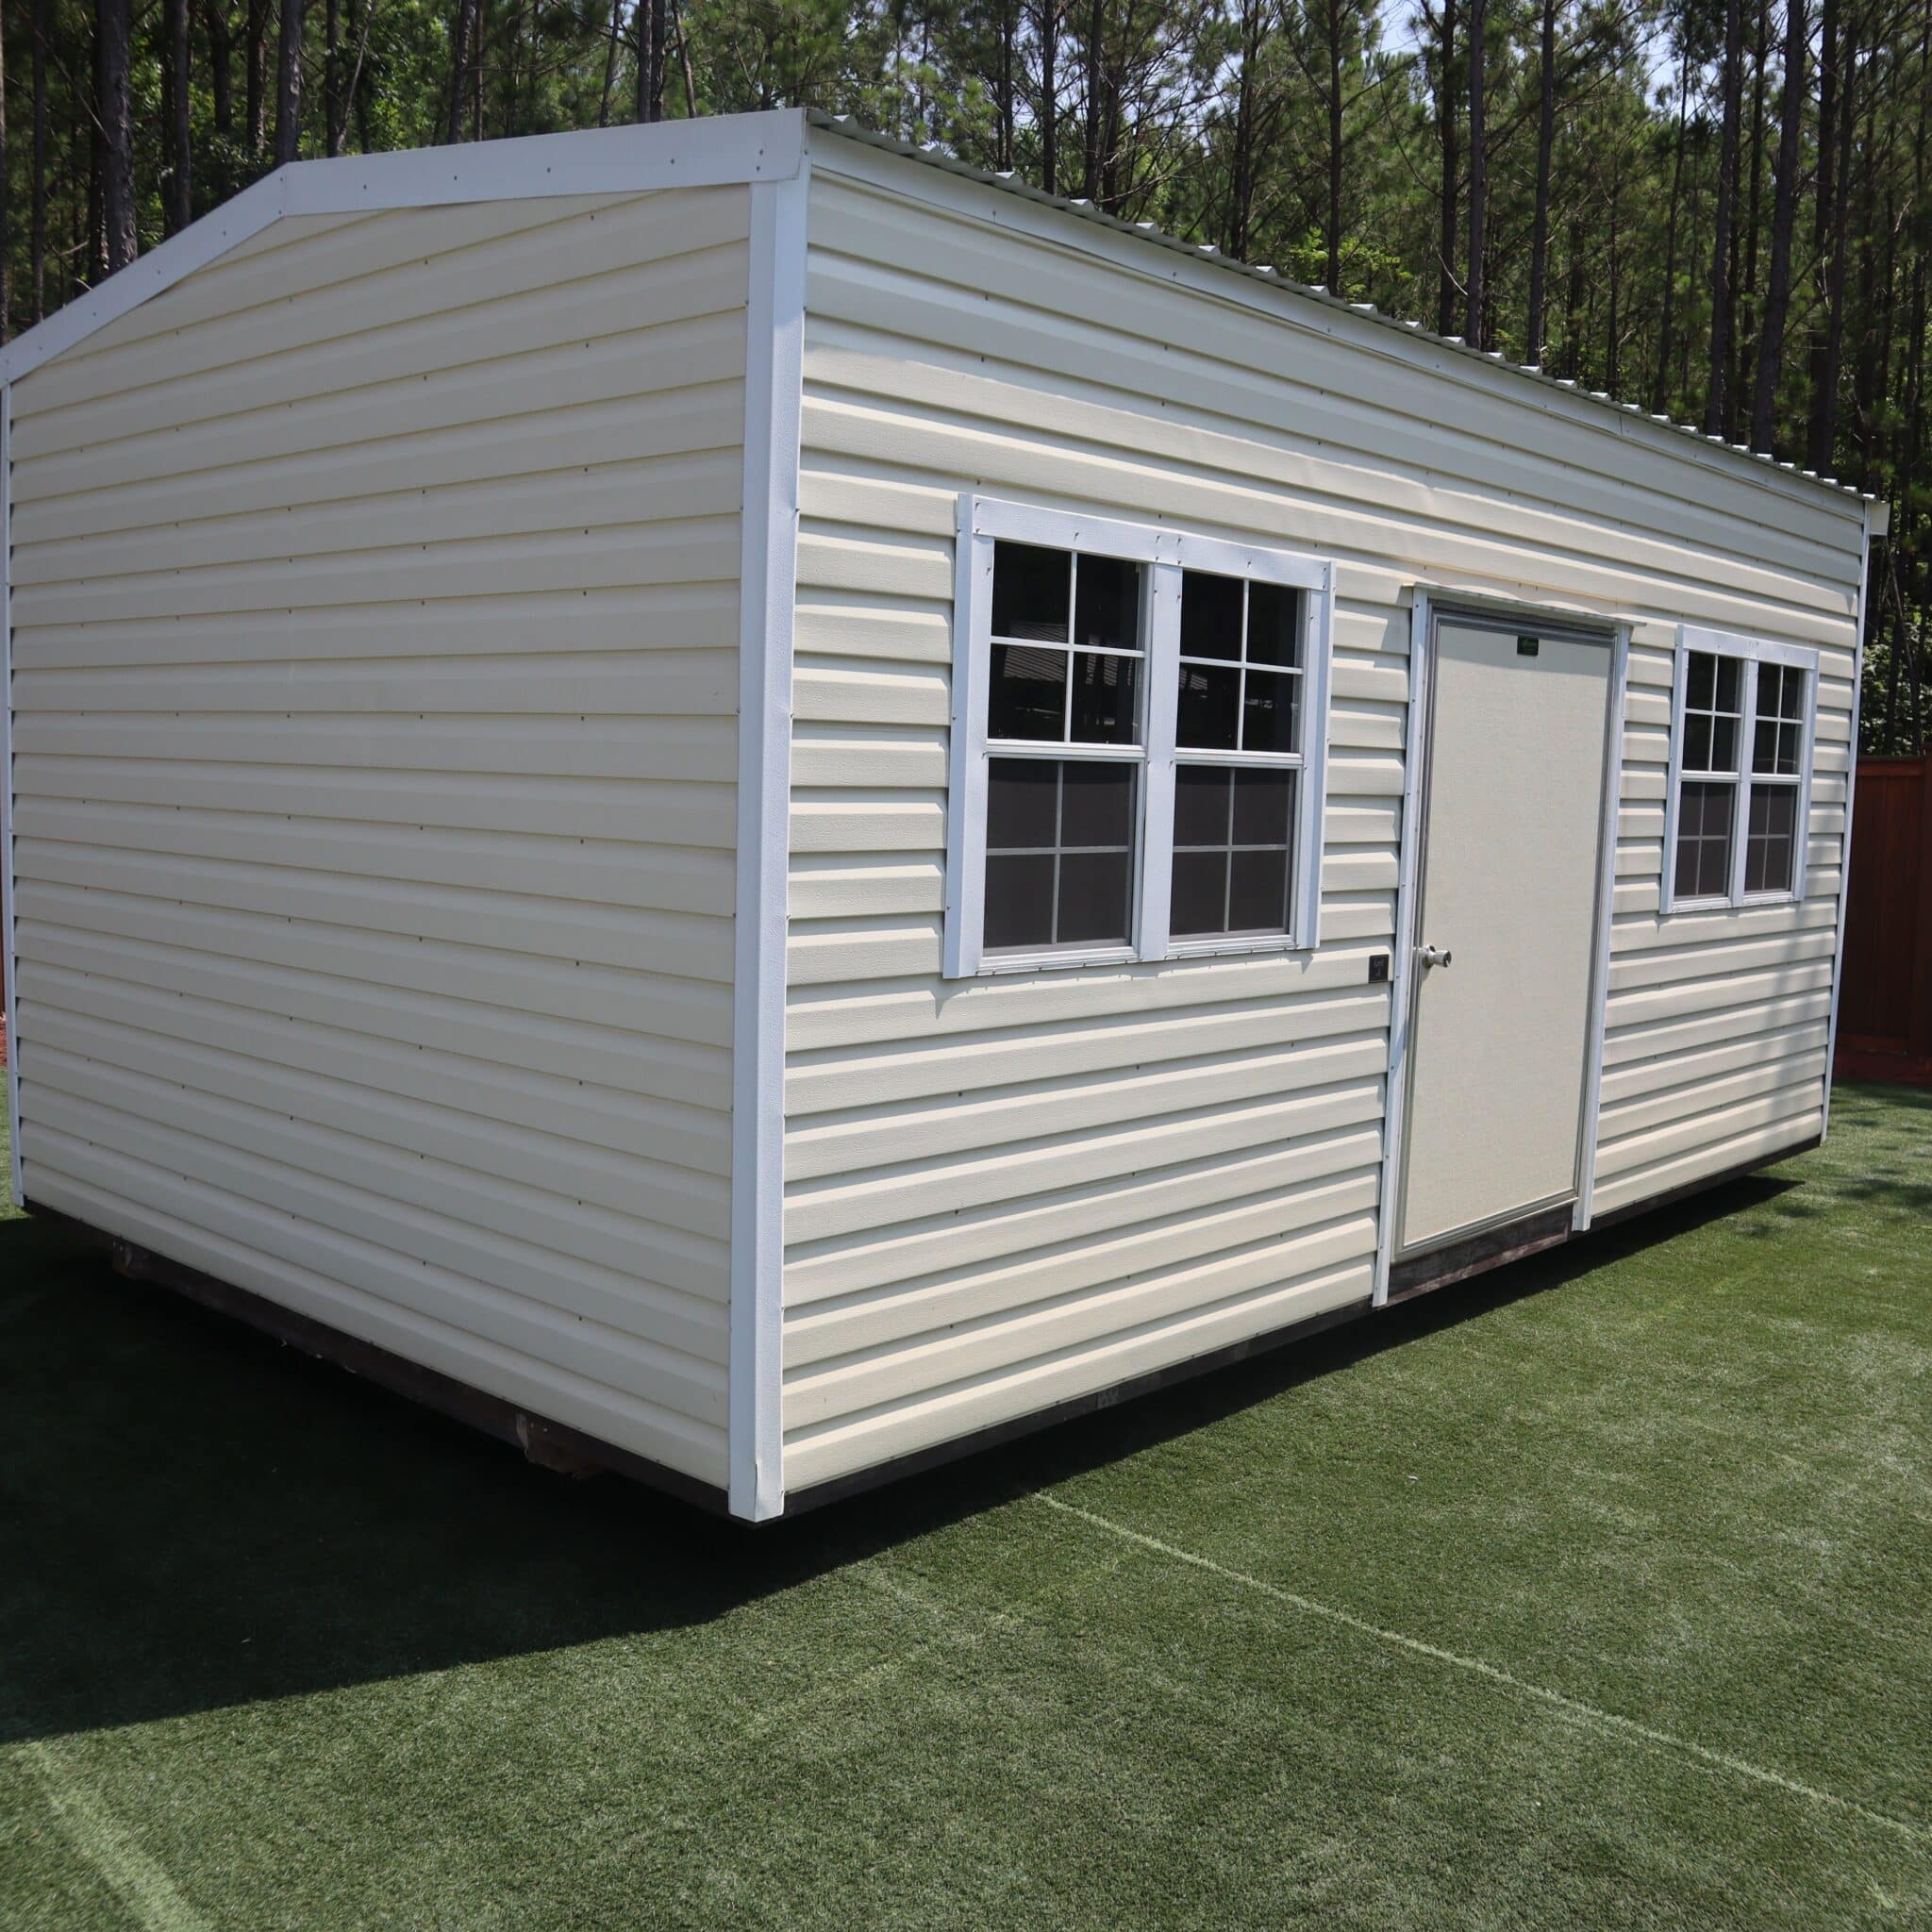 OutdoorOptions Eatonton Georgia 31024 Shed Picture Replace 167 Storage For Your Life Outdoor Options